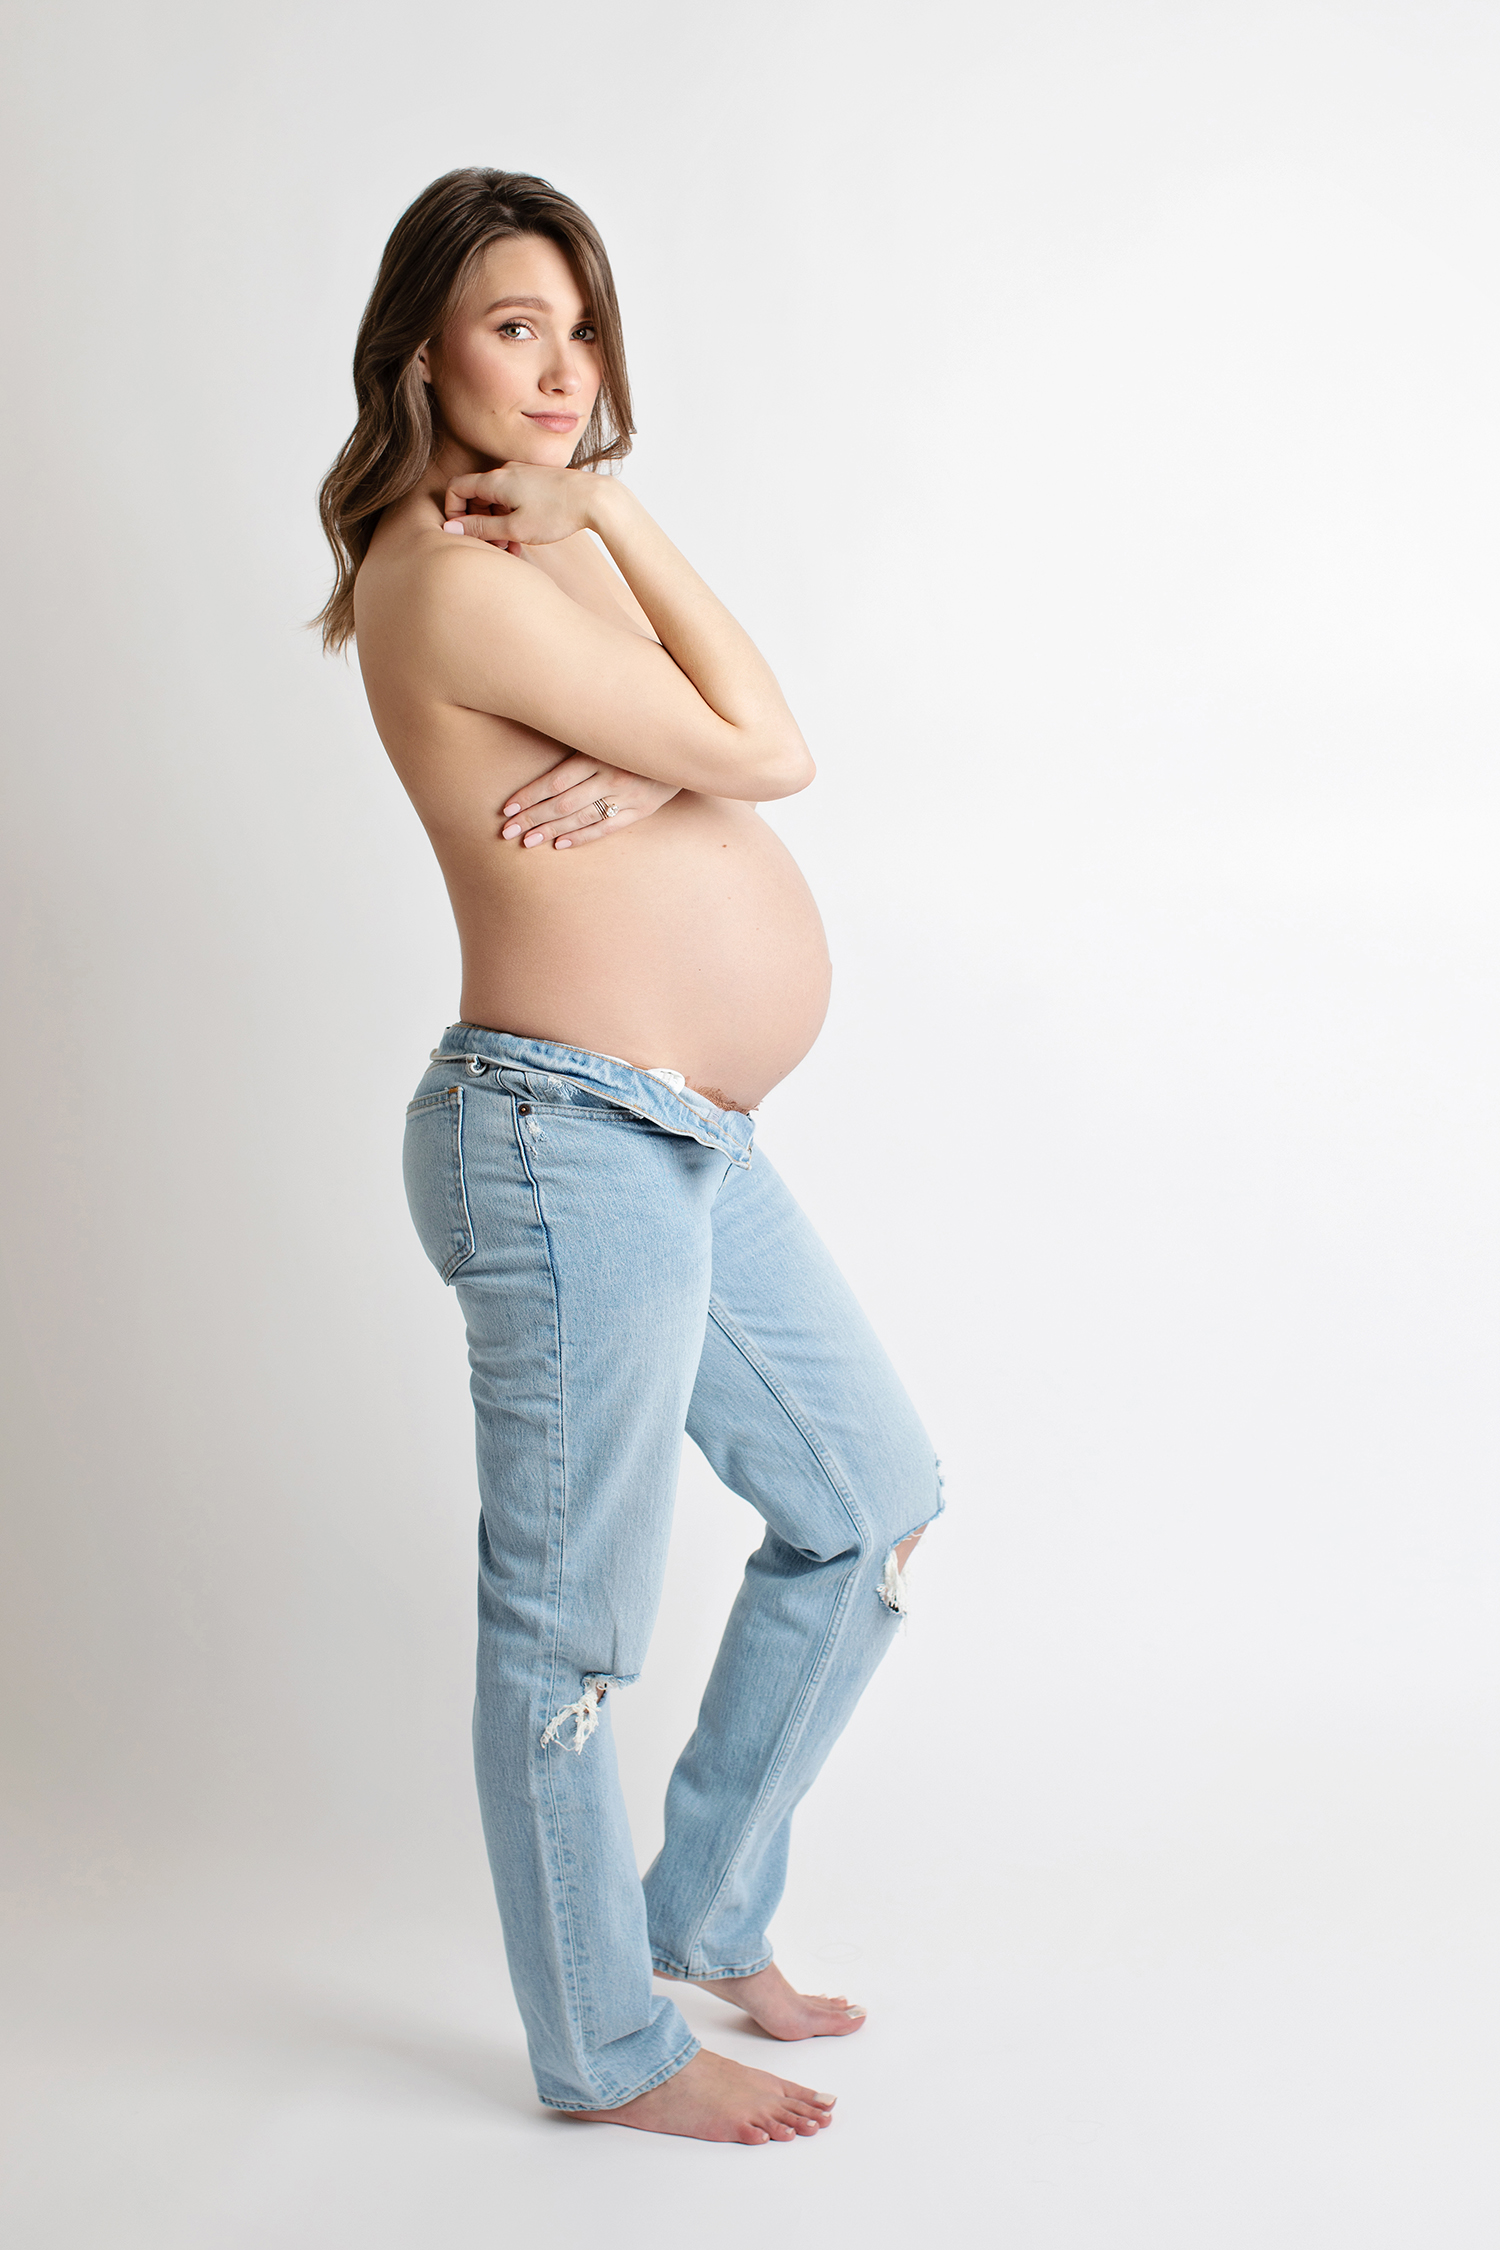 a pregnant woman posing in denim, for a natural maternity photoshoot